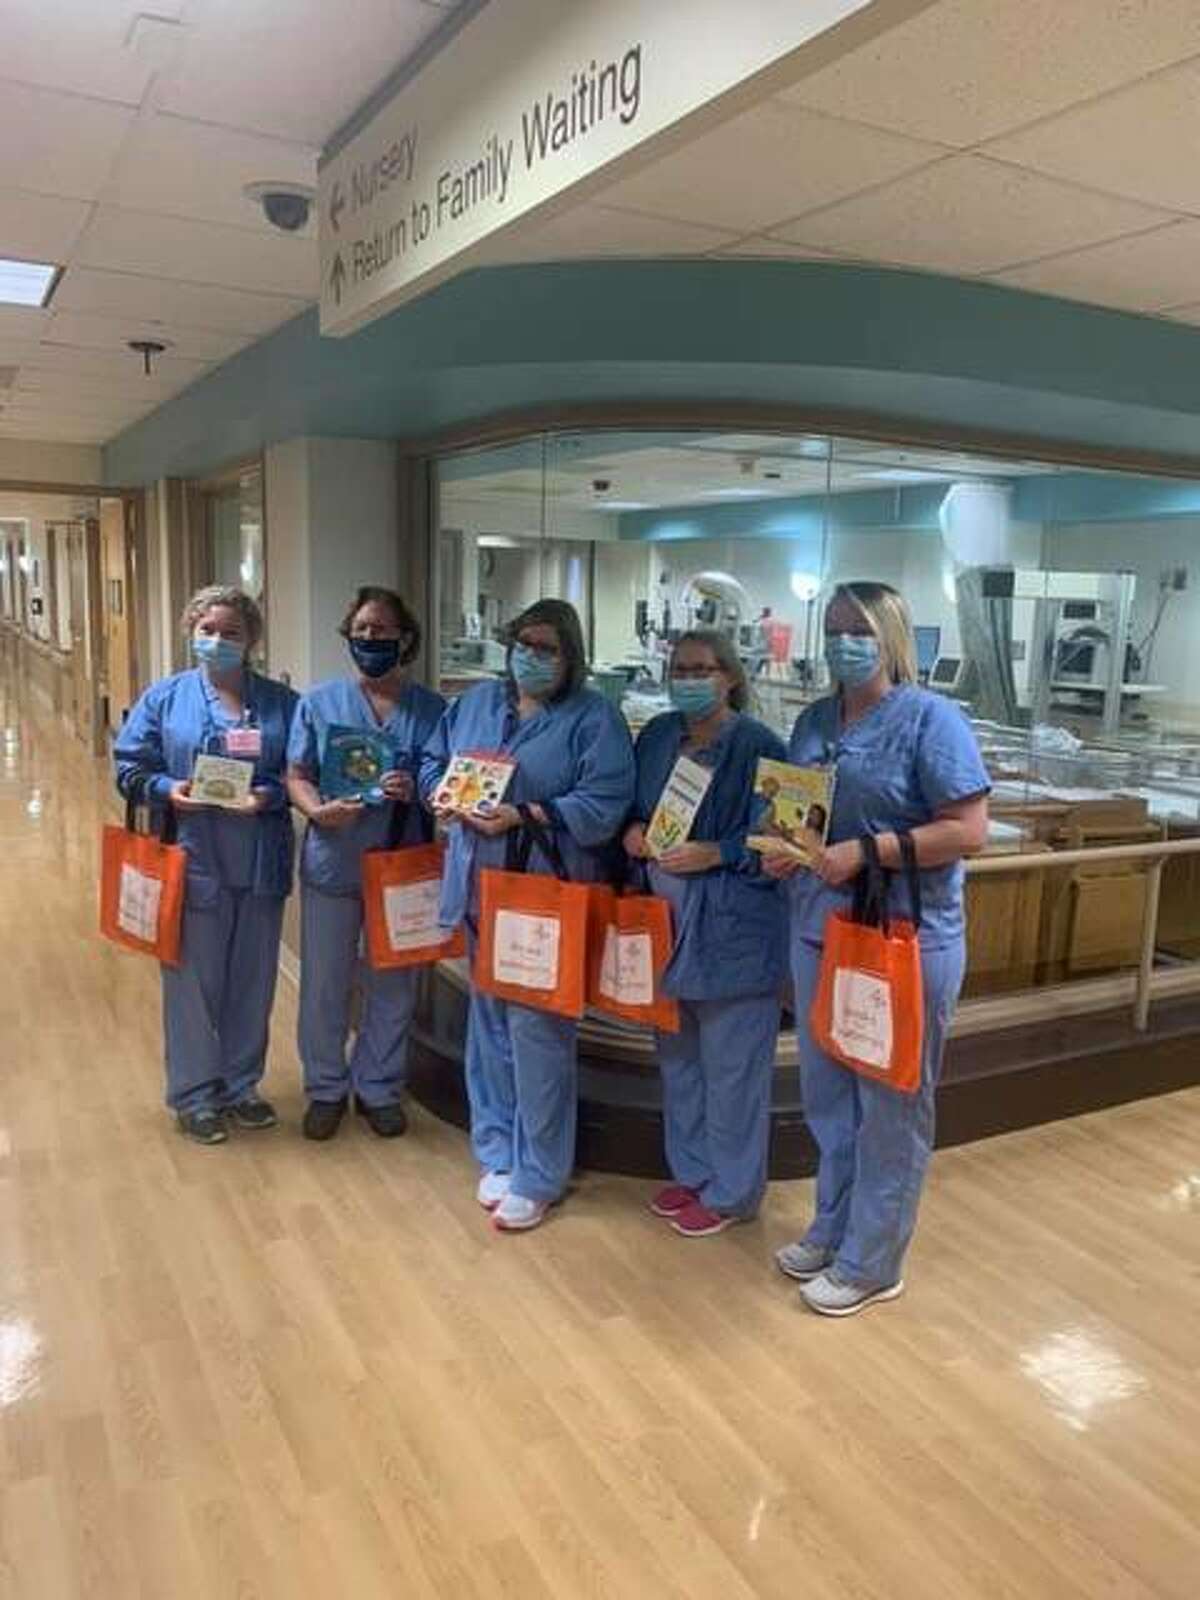 Alton Memorial Hospital staff display the Books for Newborns donations recently received for parents and big brothers and sisters.